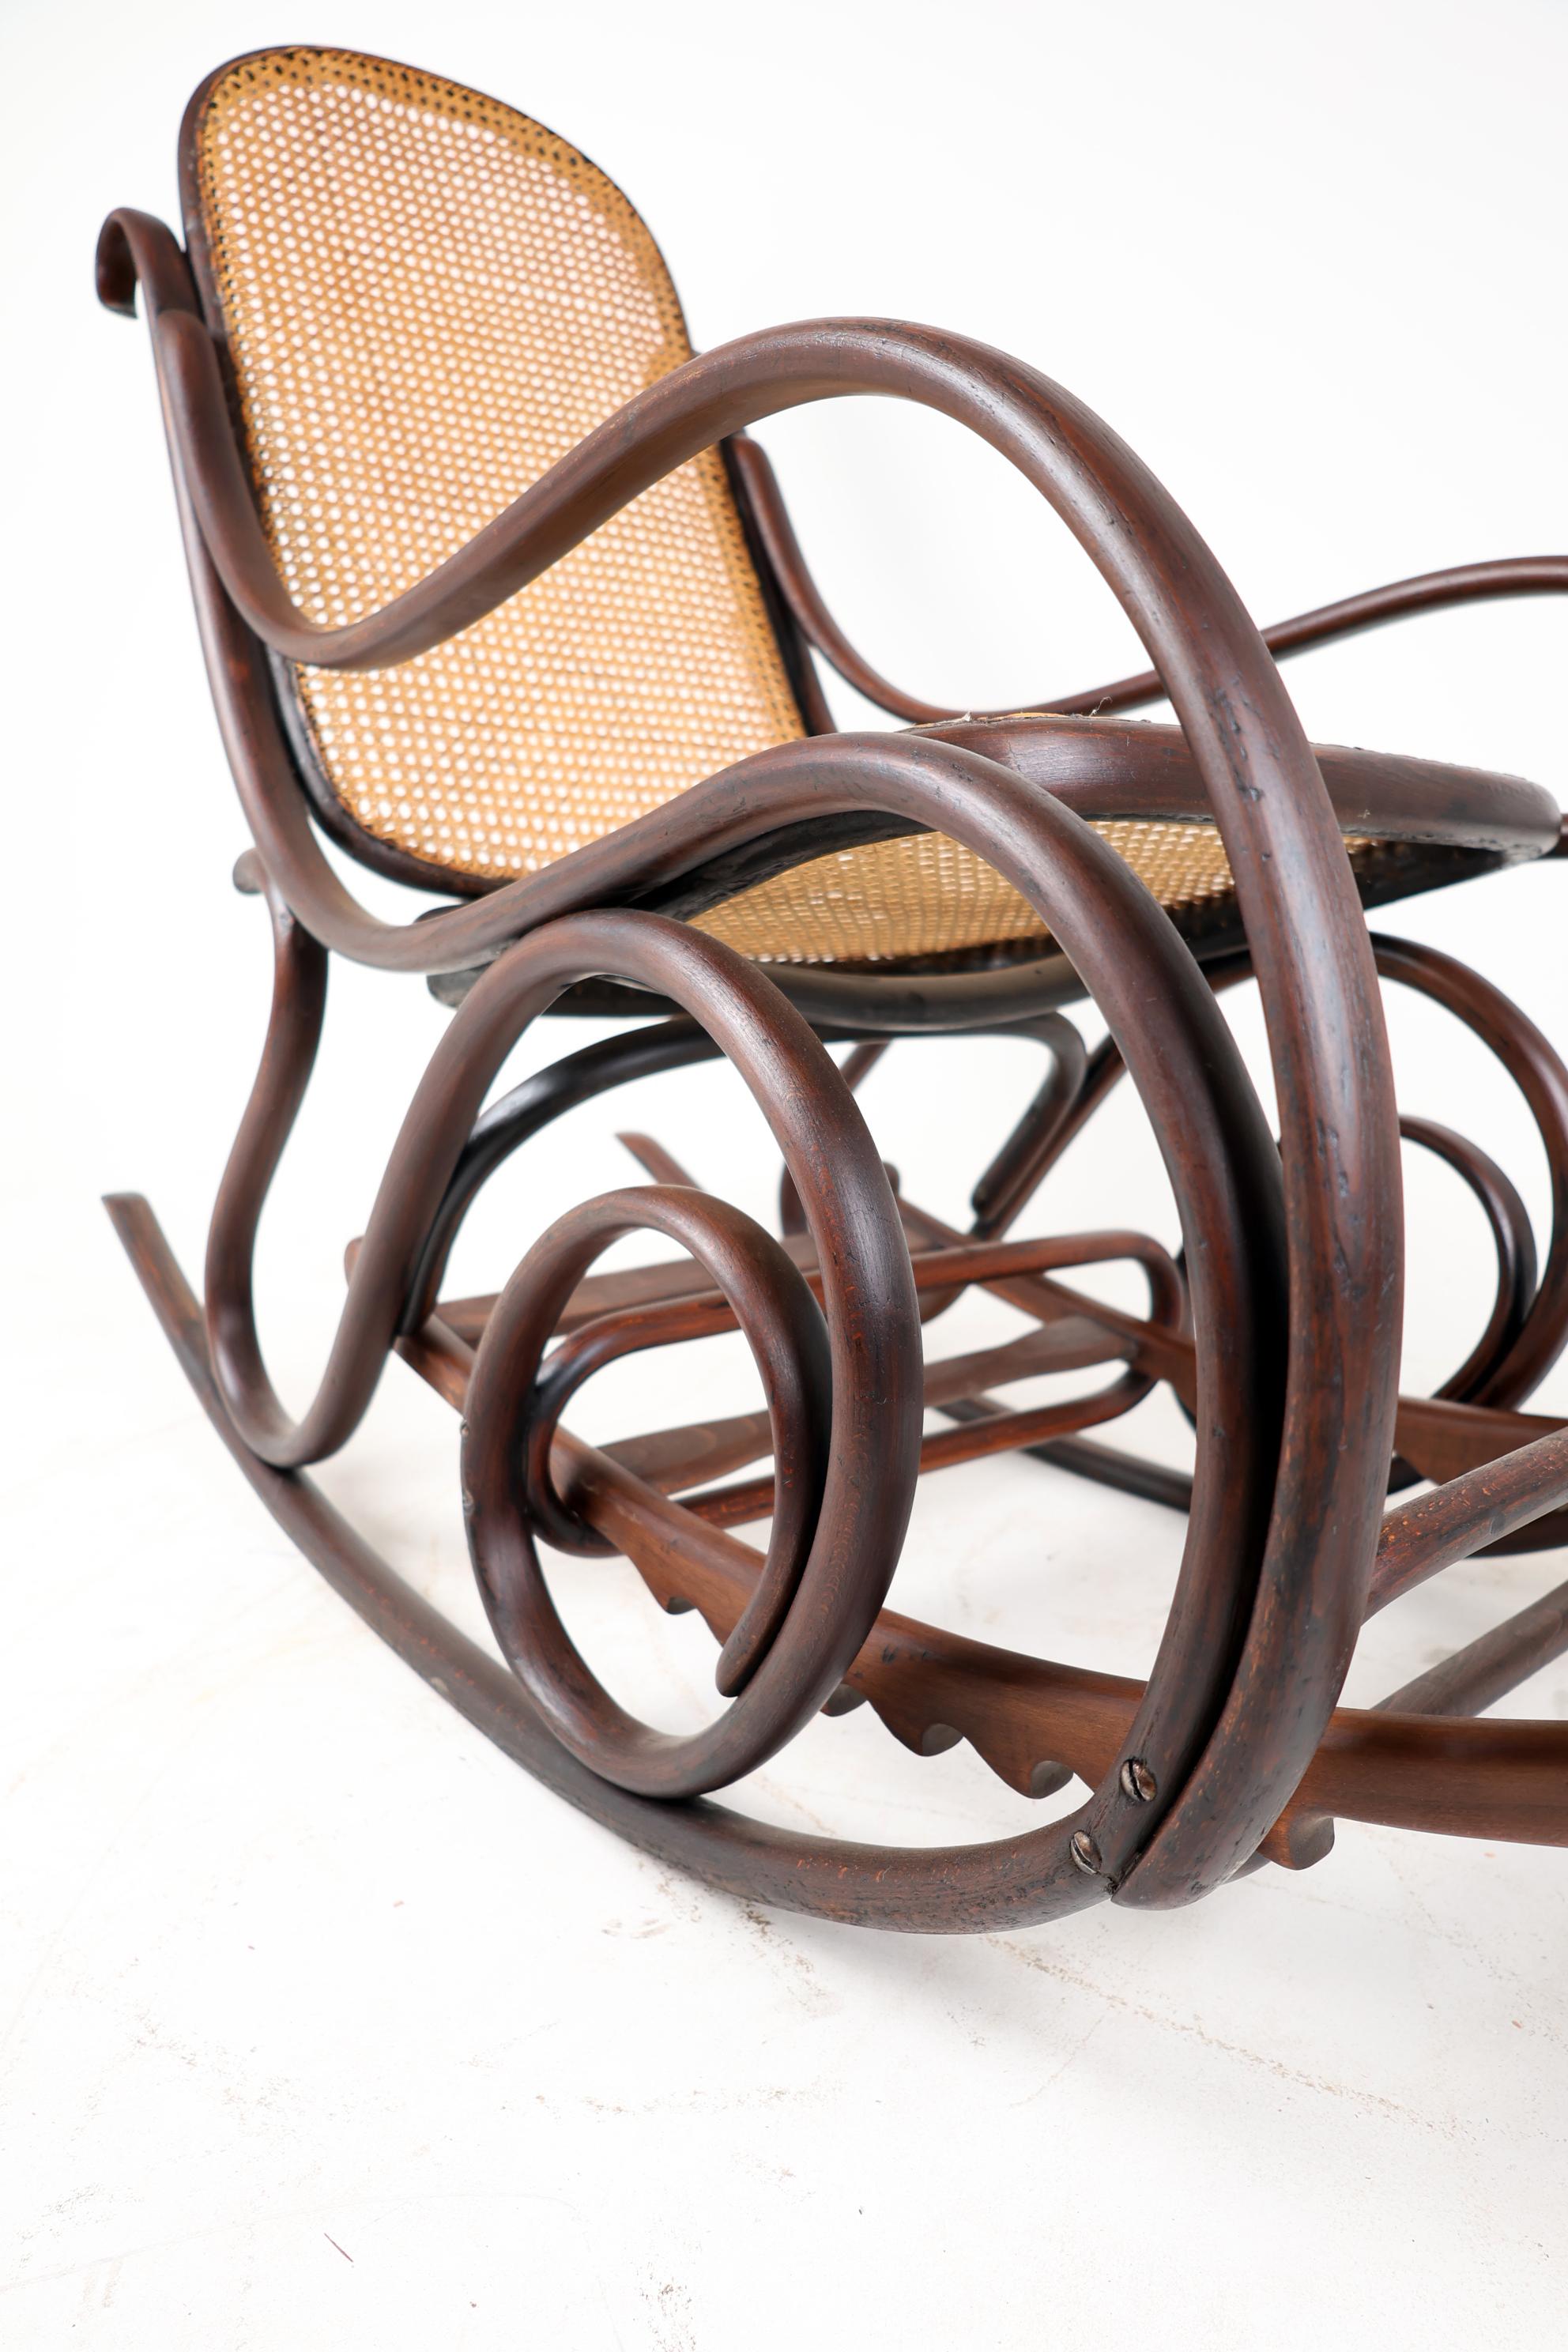 Rocking Chair And Its Footrest, Beech, Spirit 